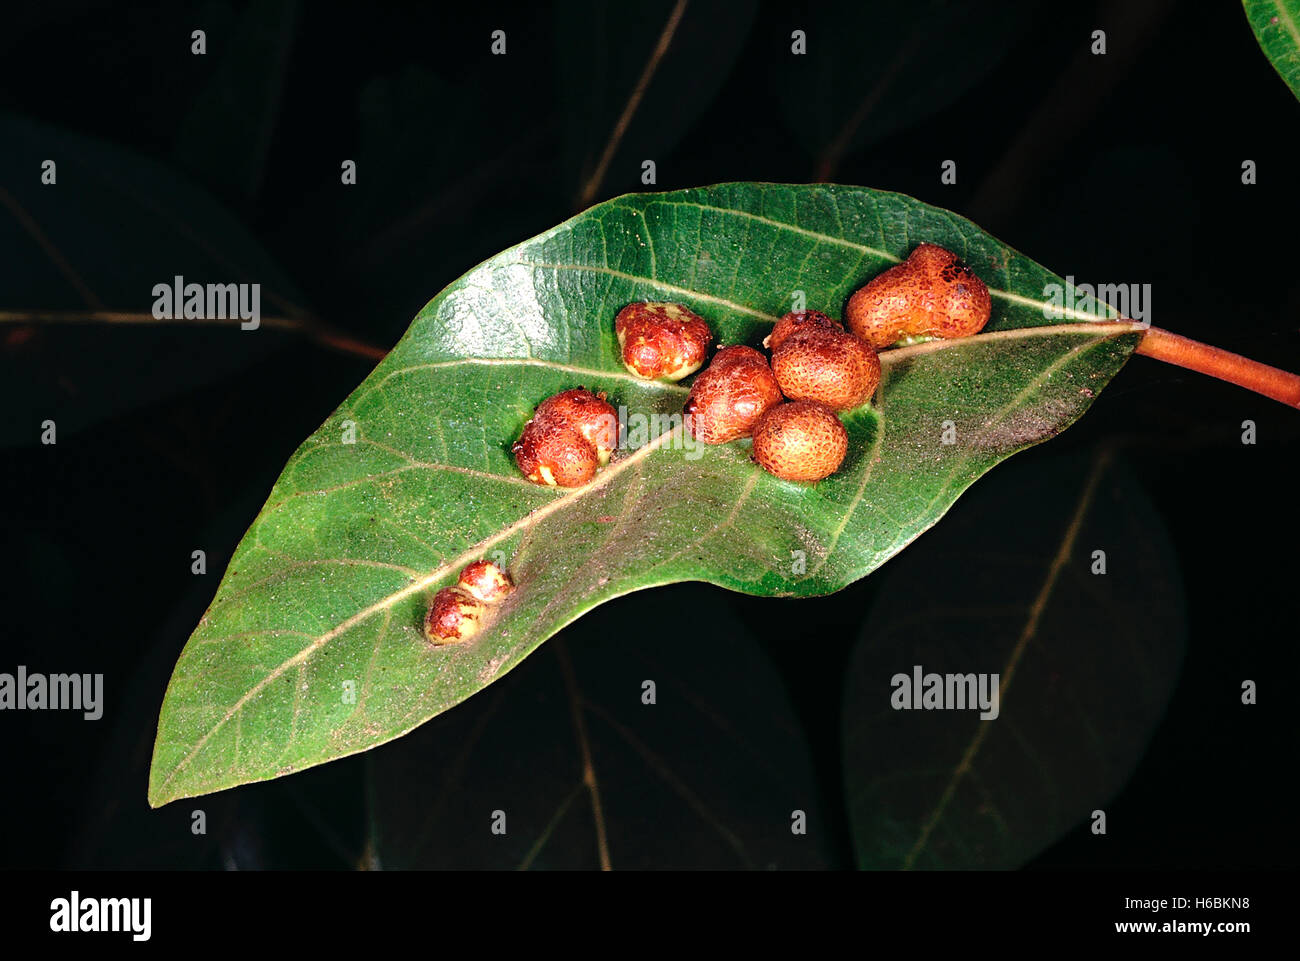 Single leaf with galls. Ficus Racemosa. Family: Moraceae. A kind of wild fig tree found in moist areas. Stock Photo